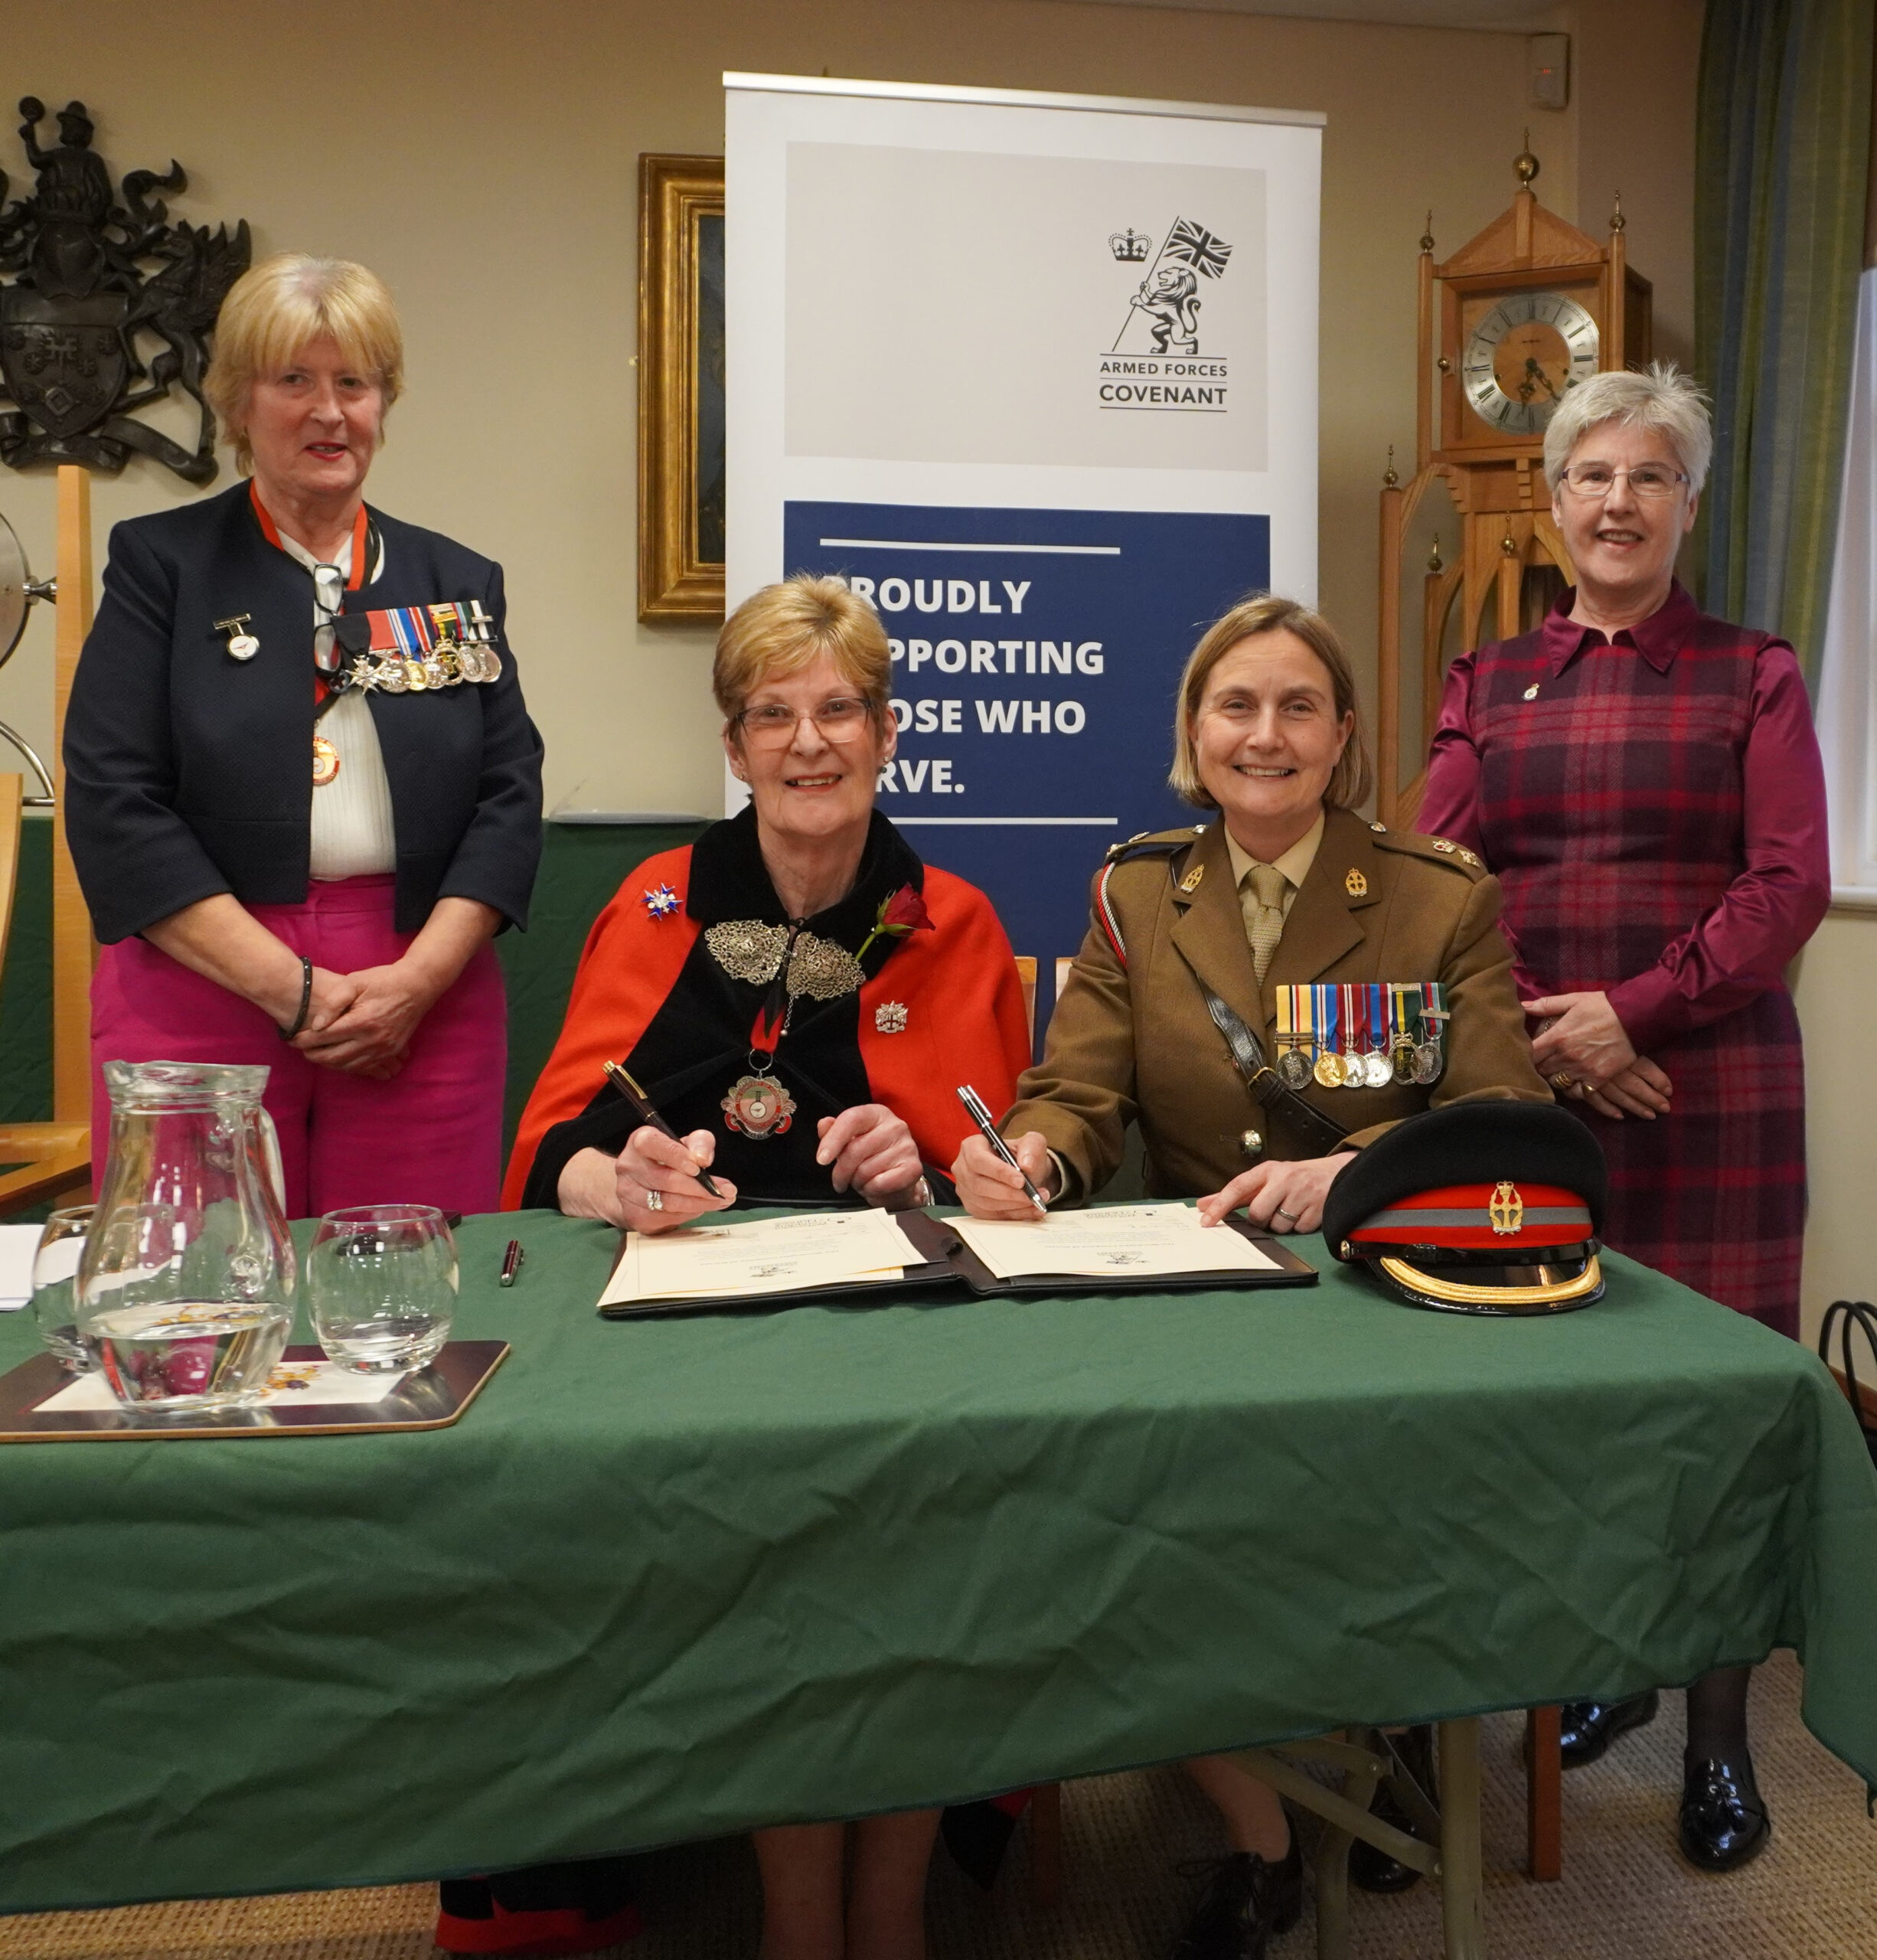 Four women posing for a signature on the Armed Forces Covenant document